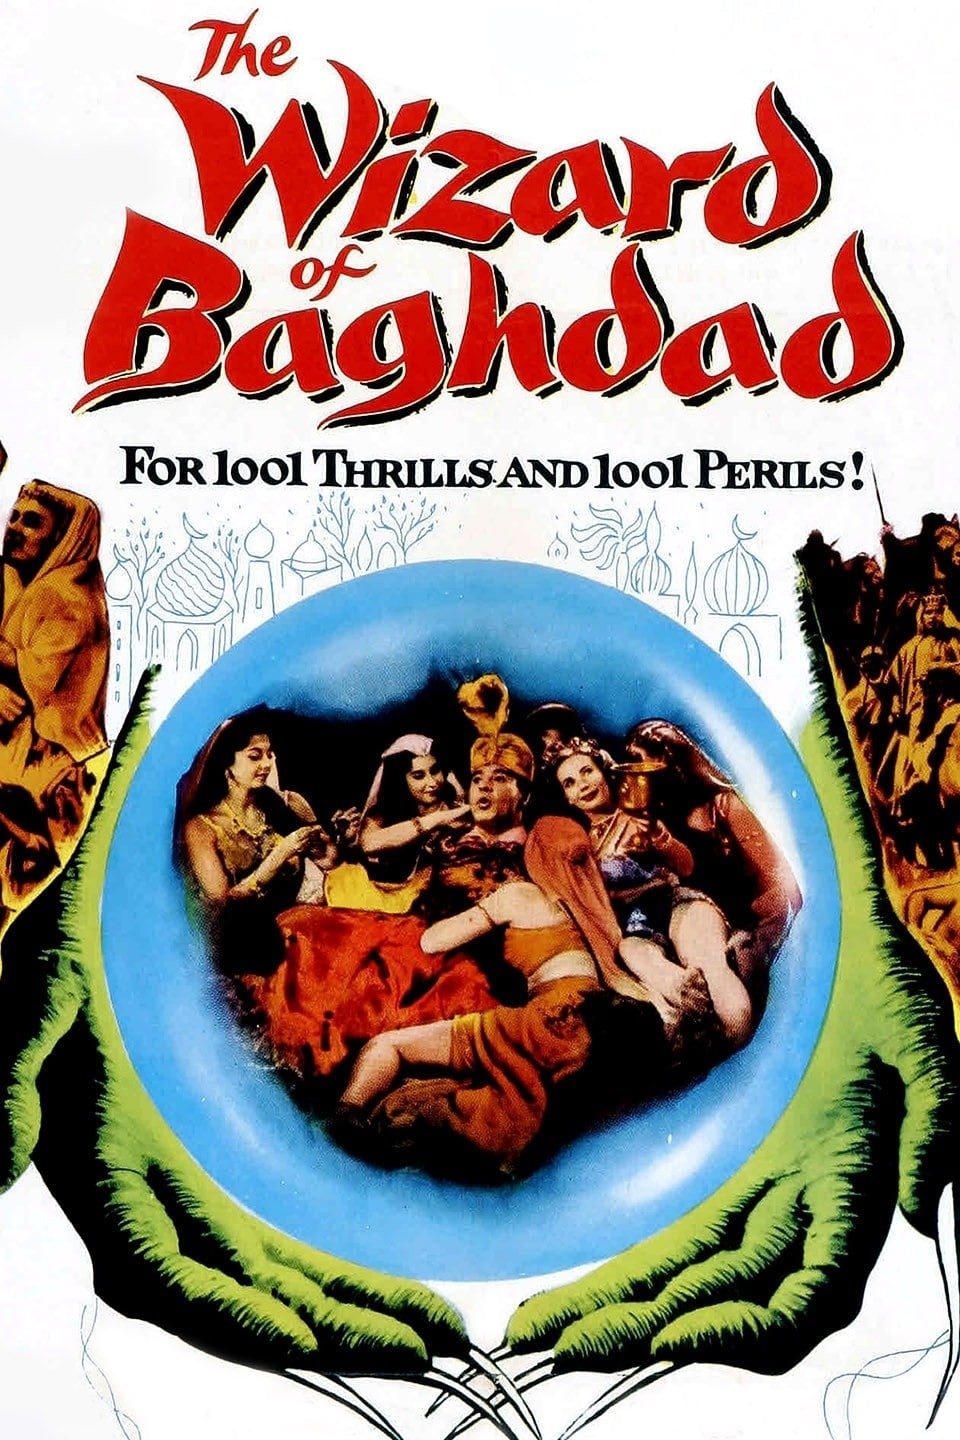 The Wizard of Baghdad (1961)